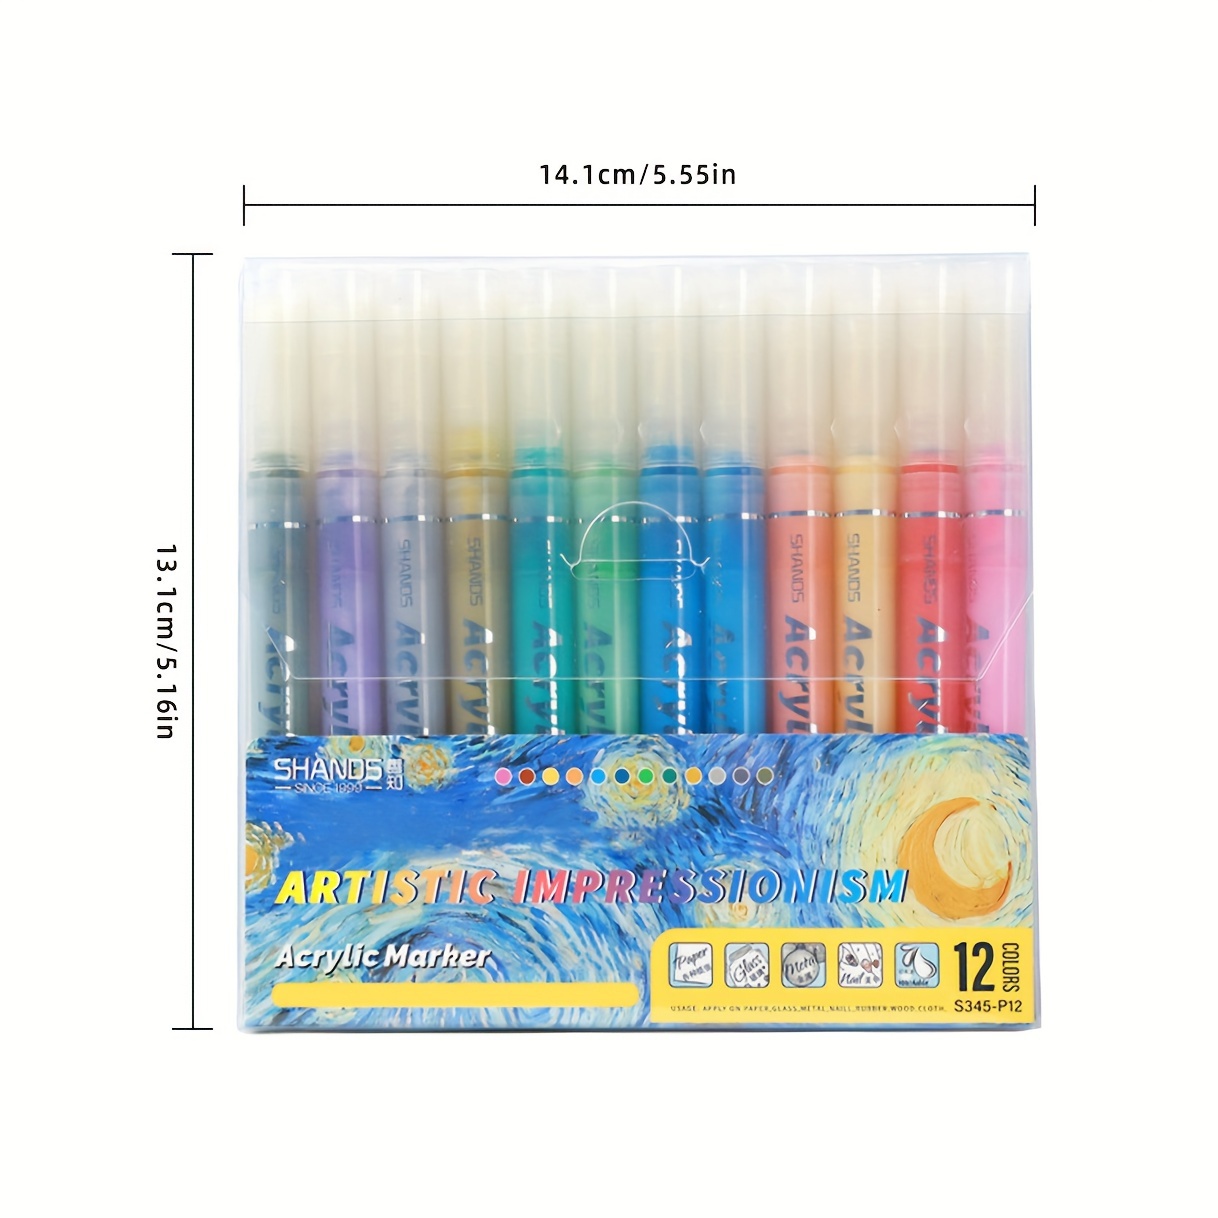 Paint Pens for Rock Painting, Stone, Ceramic, Glass, Wood, Canvas. DIY  Craft-making Supplies. Set of 30 Acrylic Paint Markers. Fine Tip 1mm 